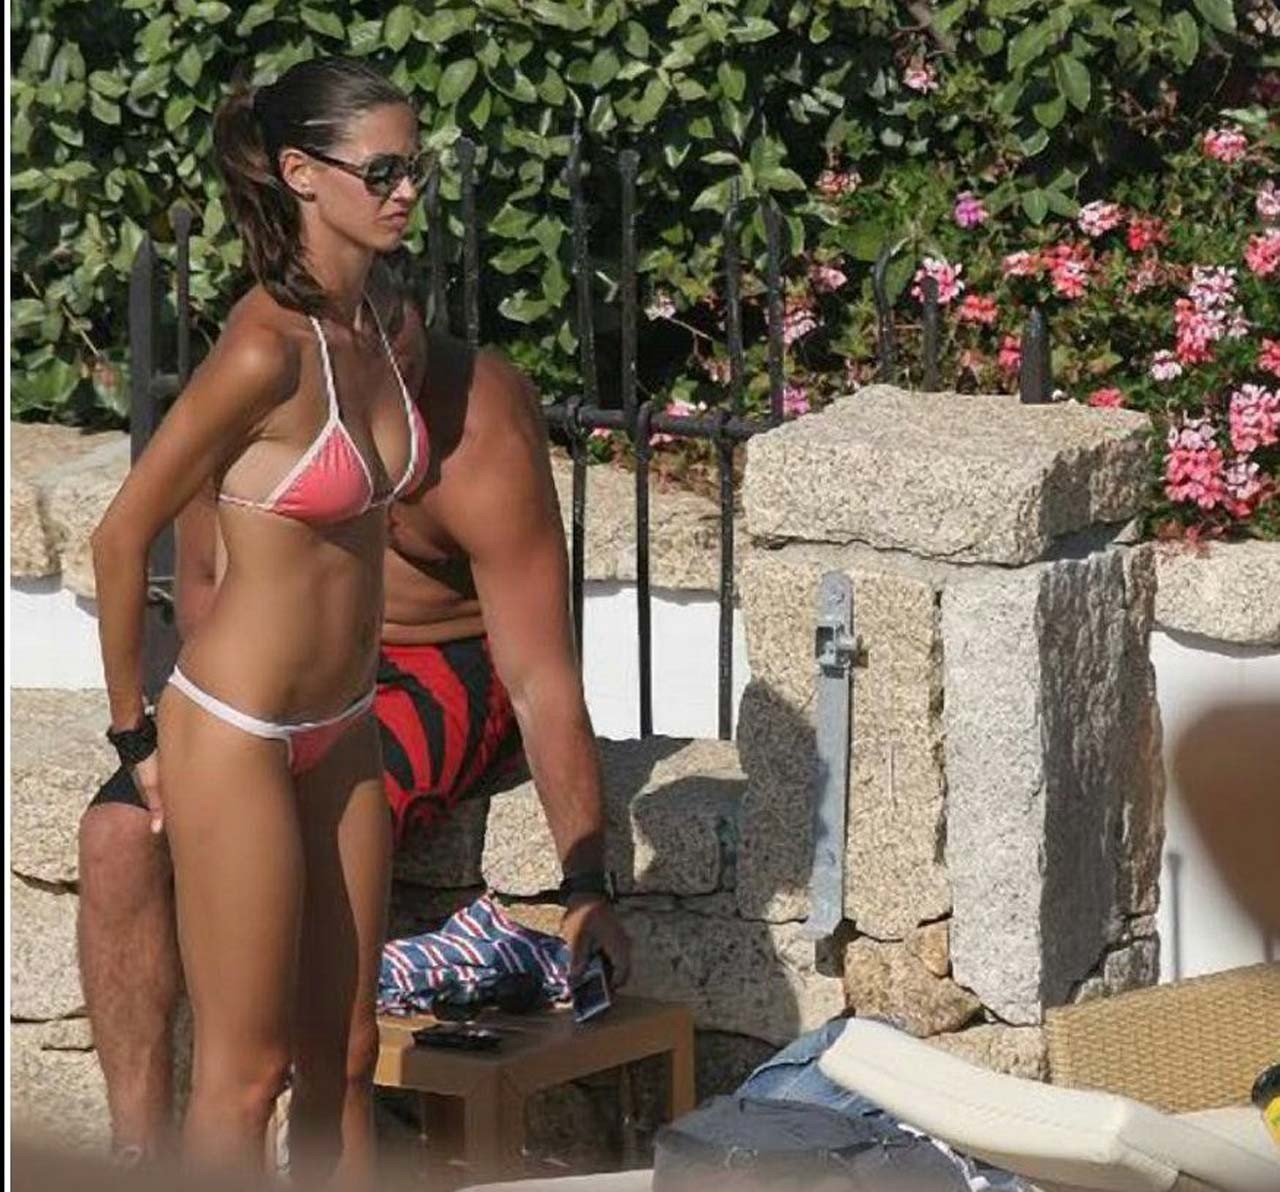 Melissa Satta showing her nice body and ass in thong on beach #75320096